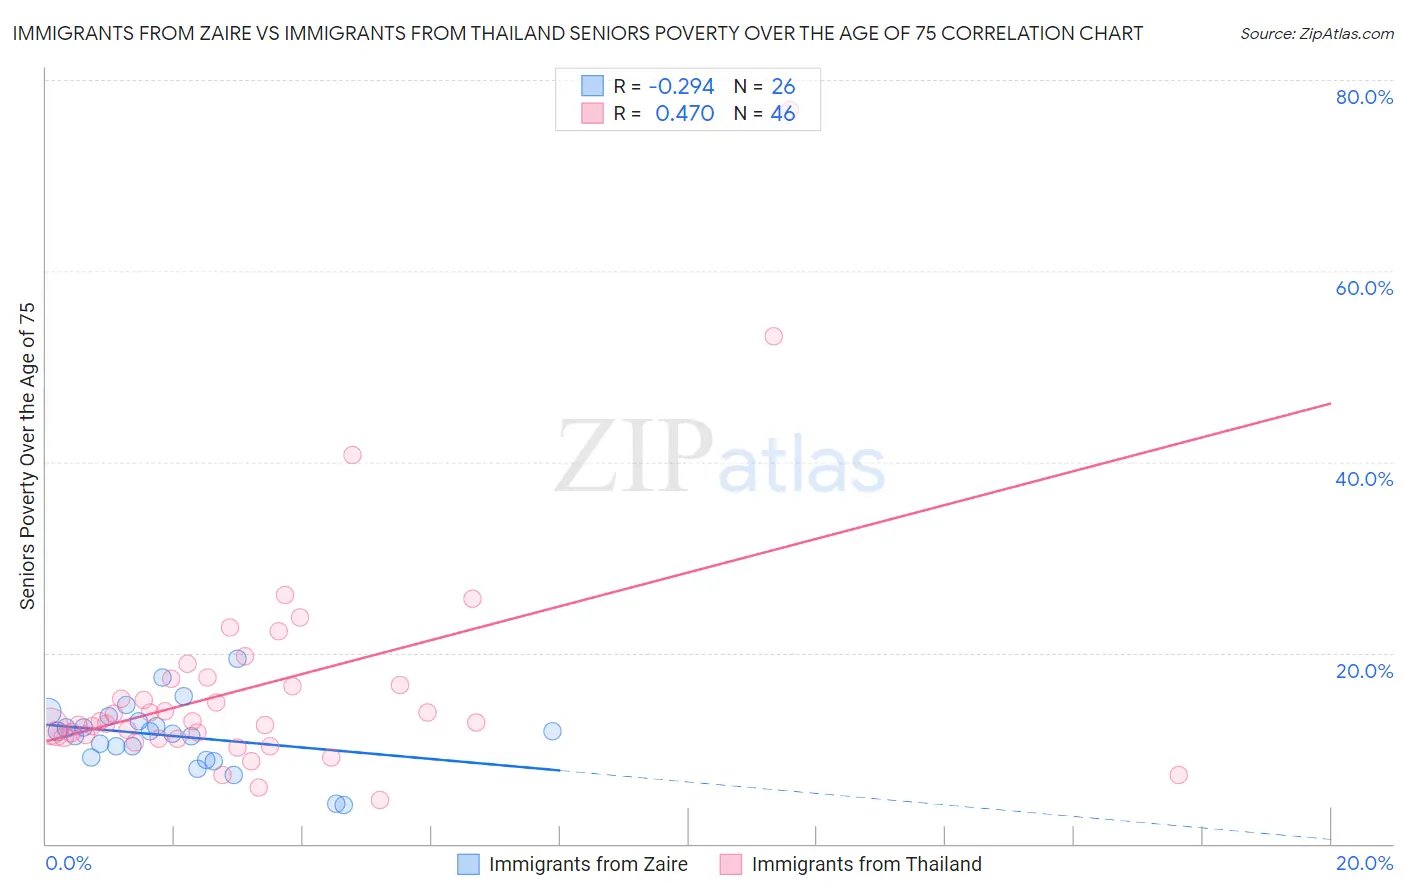 Immigrants from Zaire vs Immigrants from Thailand Seniors Poverty Over the Age of 75